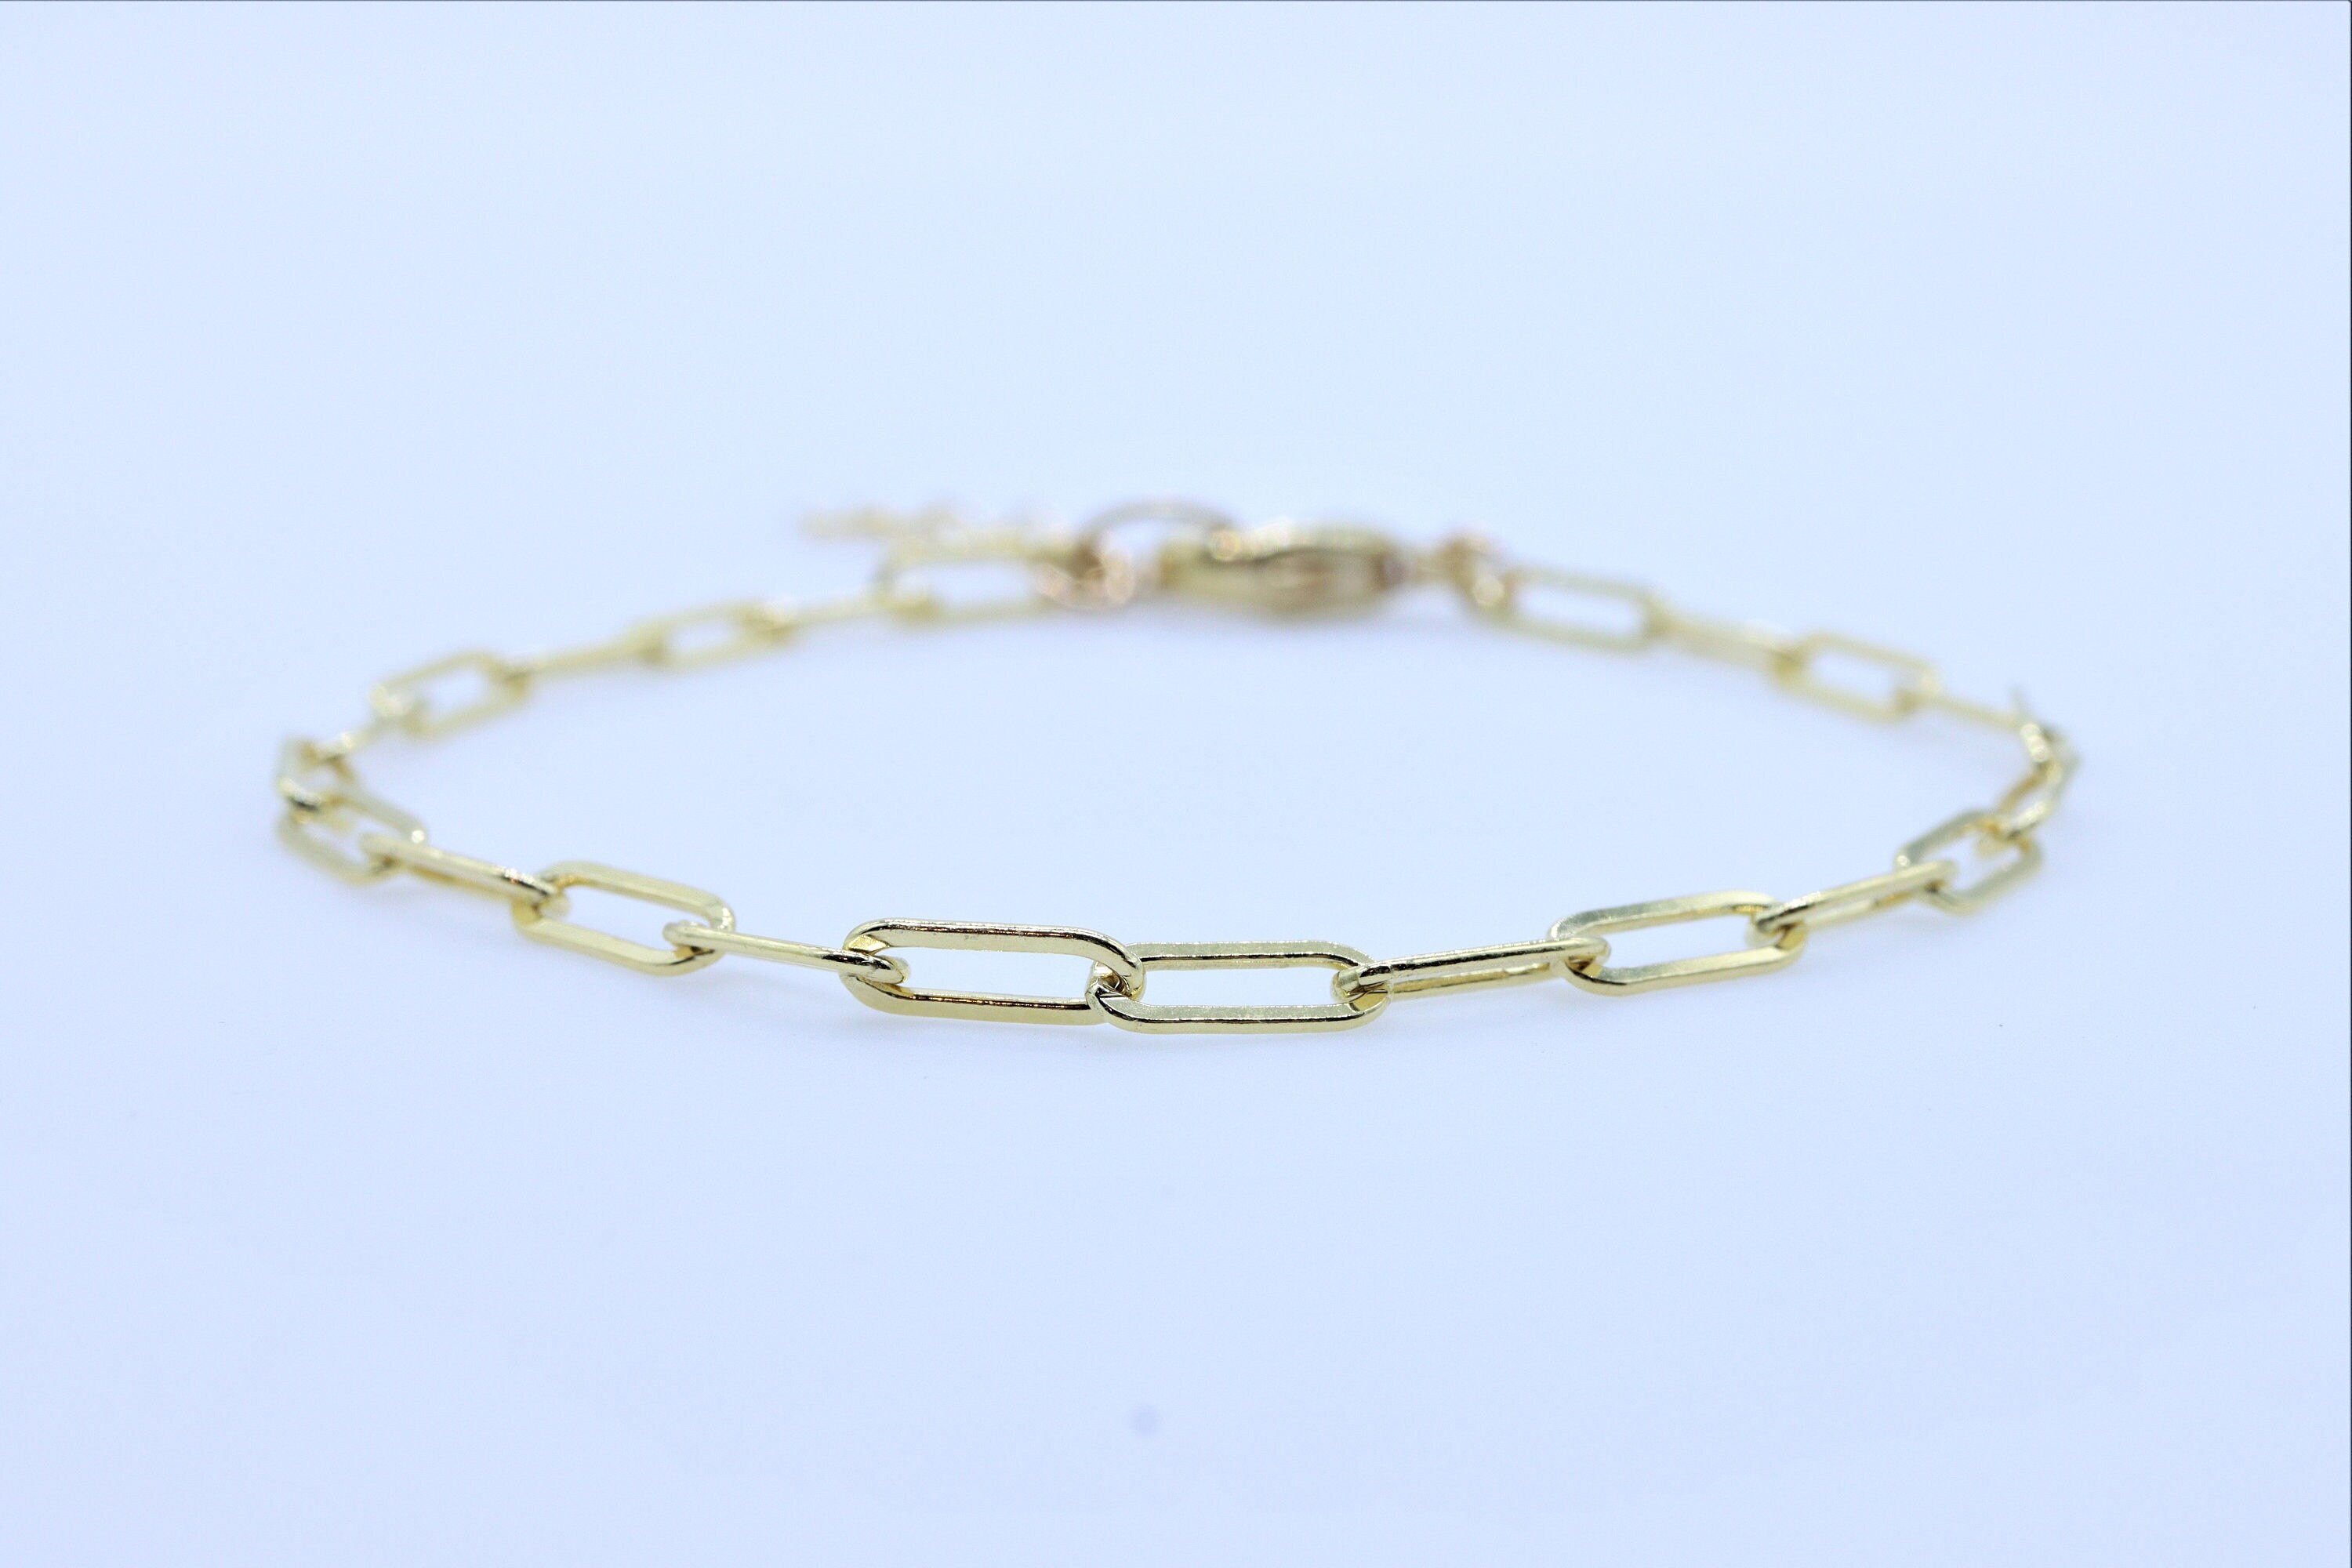 Small Link Paperclip Chain Bracelet